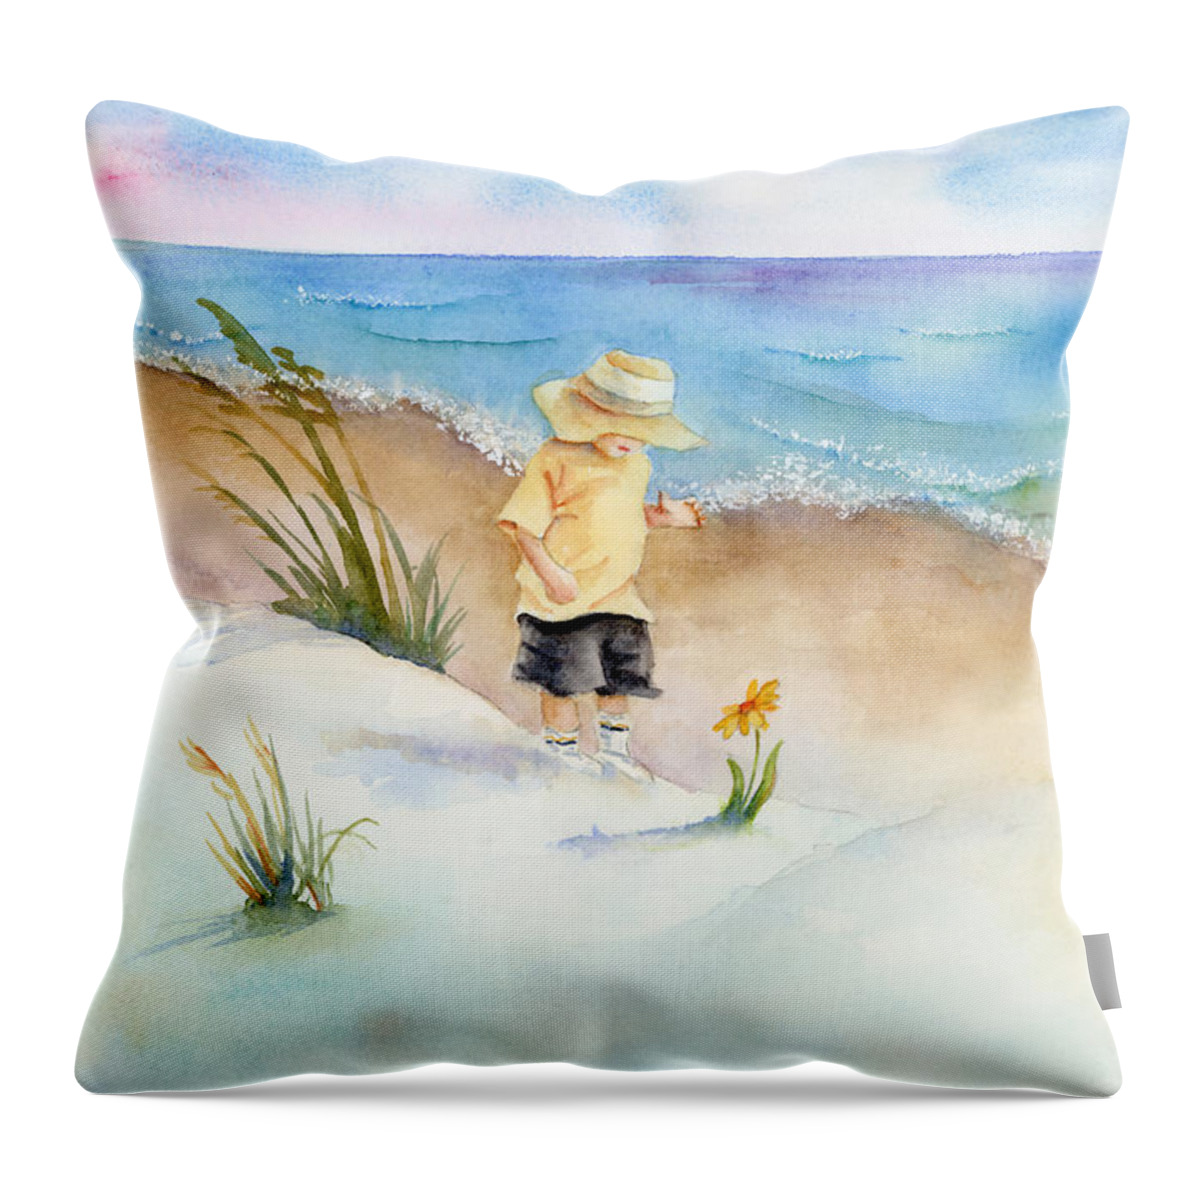 Beach Throw Pillow featuring the painting Little Saint by Amy Kirkpatrick